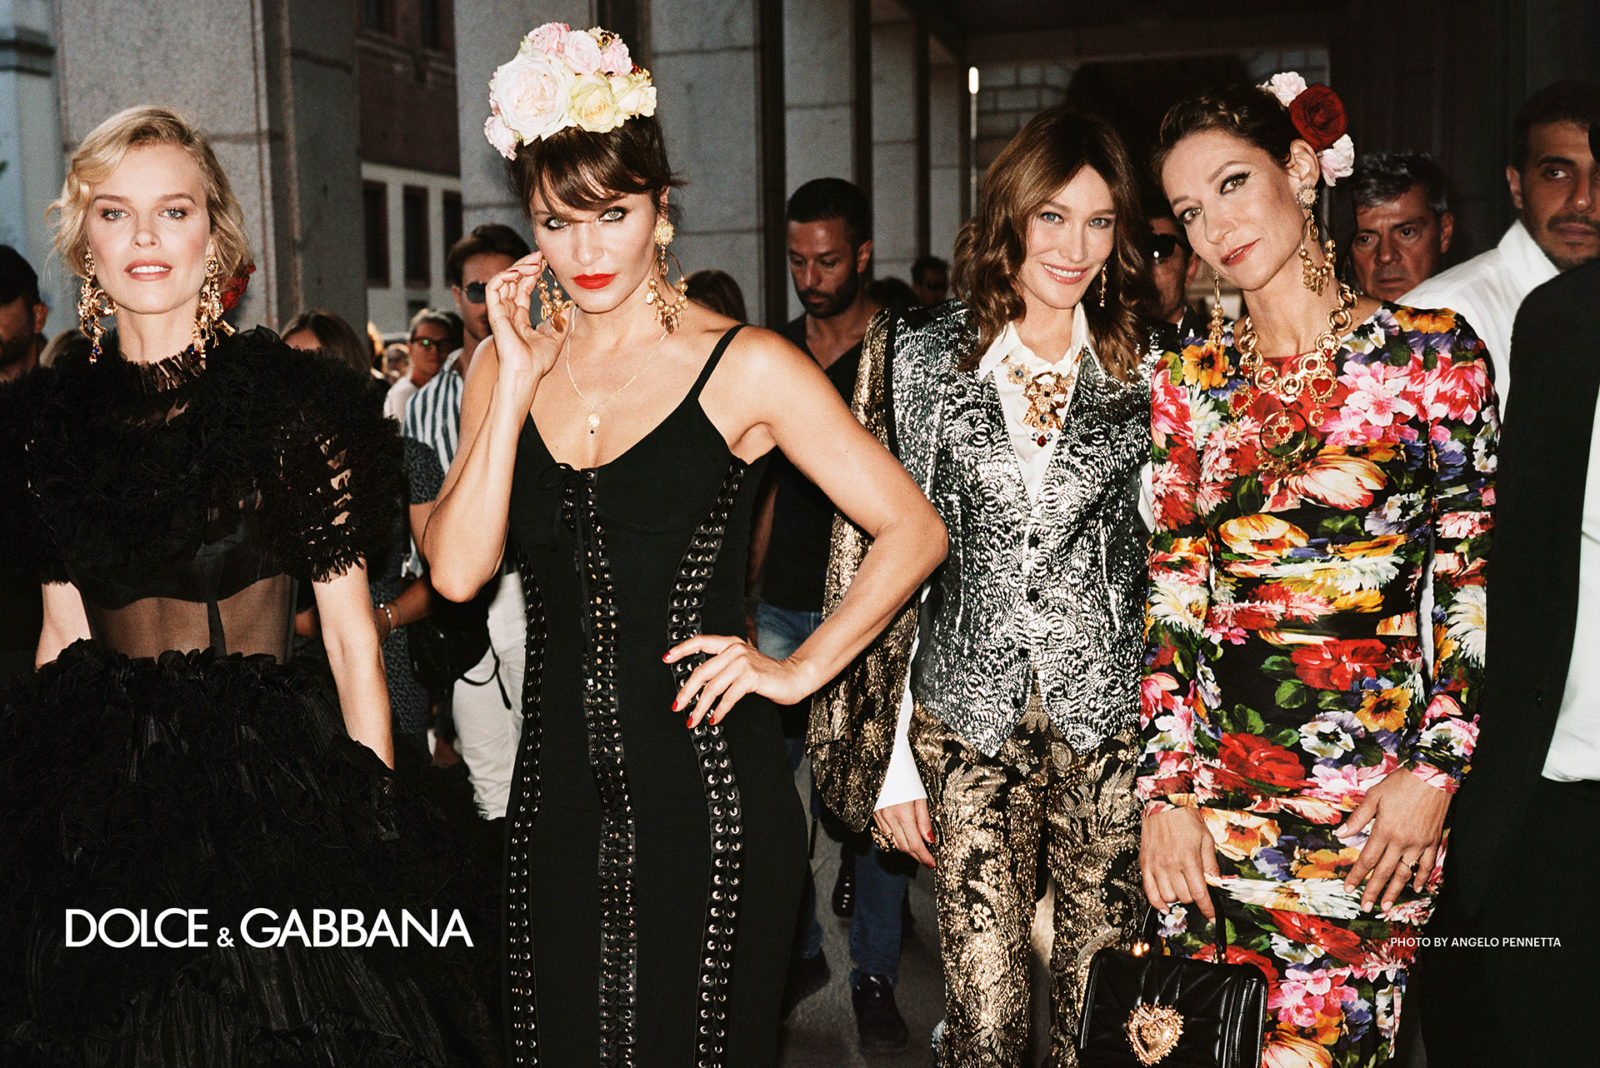 Dolce & Gabbana Scandal May Be Old News in the ., But the Brand is Still  Struggling in China - The Fashion Law